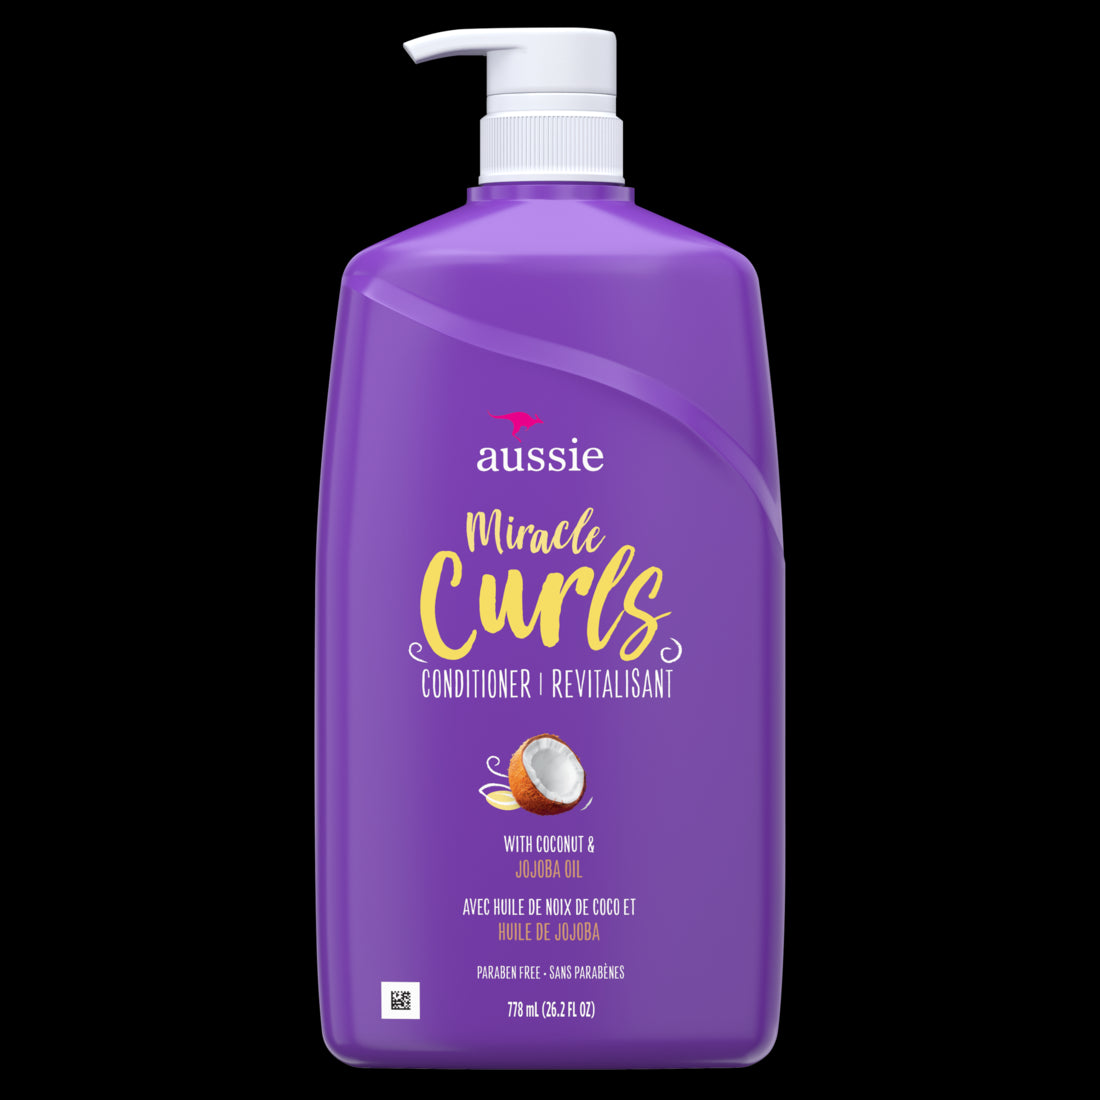 Aussie Miracle Curls with Coconut Oil Conditioner - 26.2oz/4pk